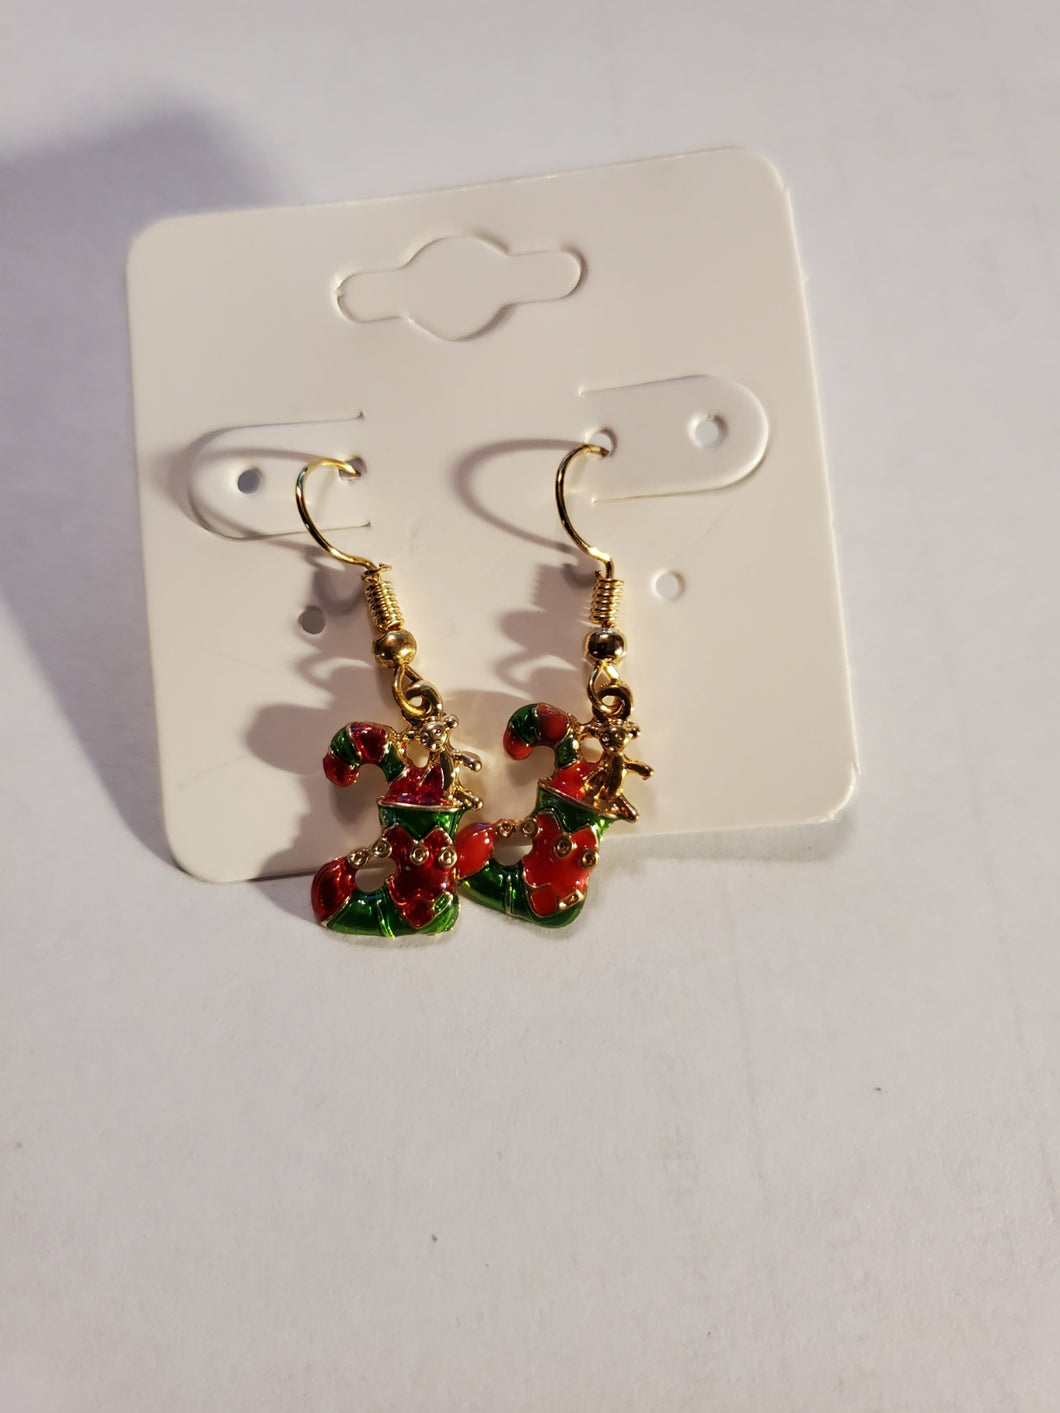 Gold and Red Stocking Earrings - Unique Inspirations by Tracy and Anna